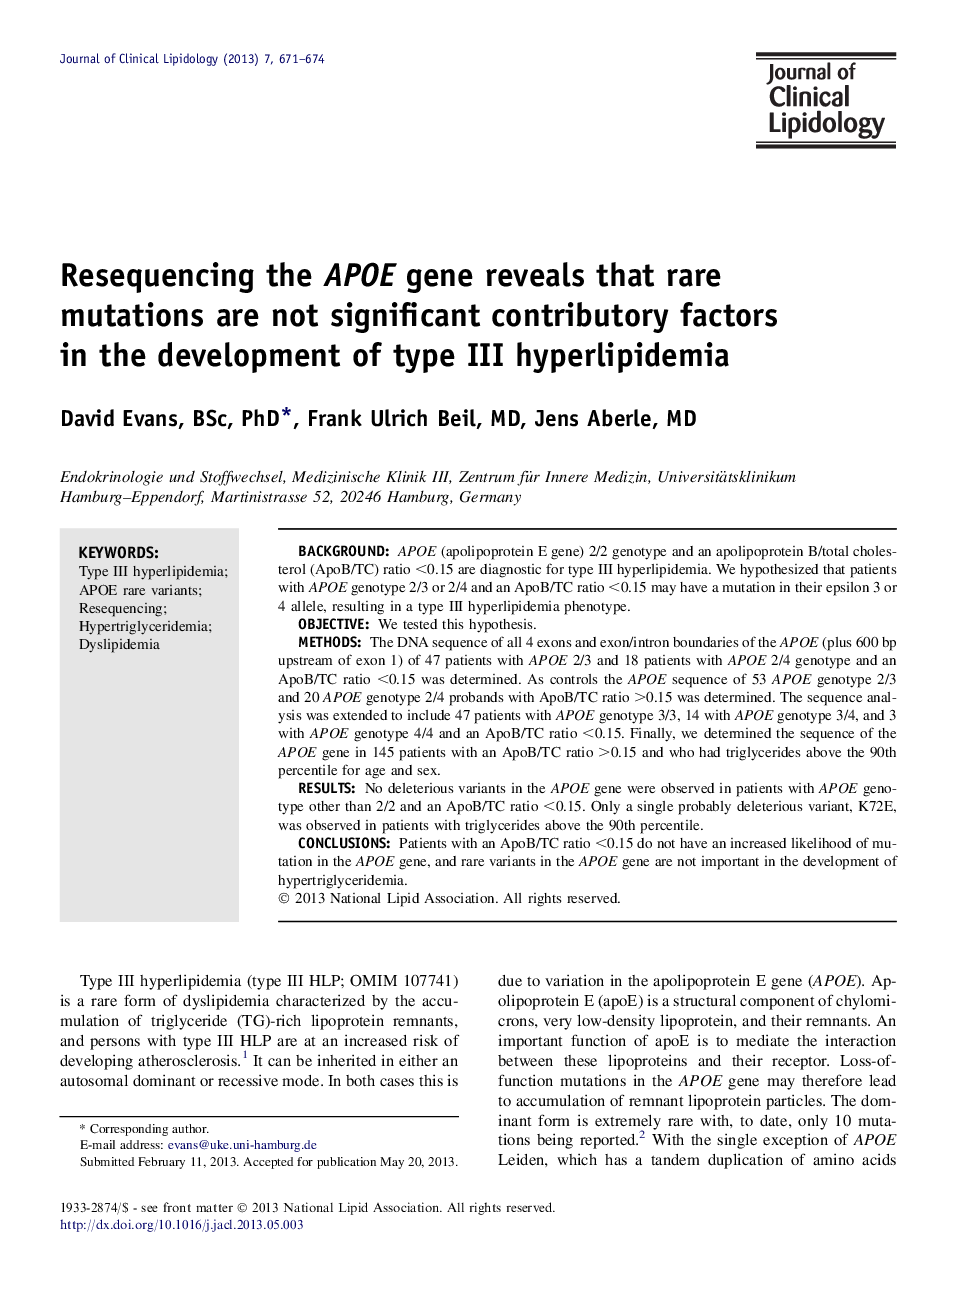 Resequencing the APOE gene reveals that rare mutations are not significant contributory factors in the development of type III hyperlipidemia